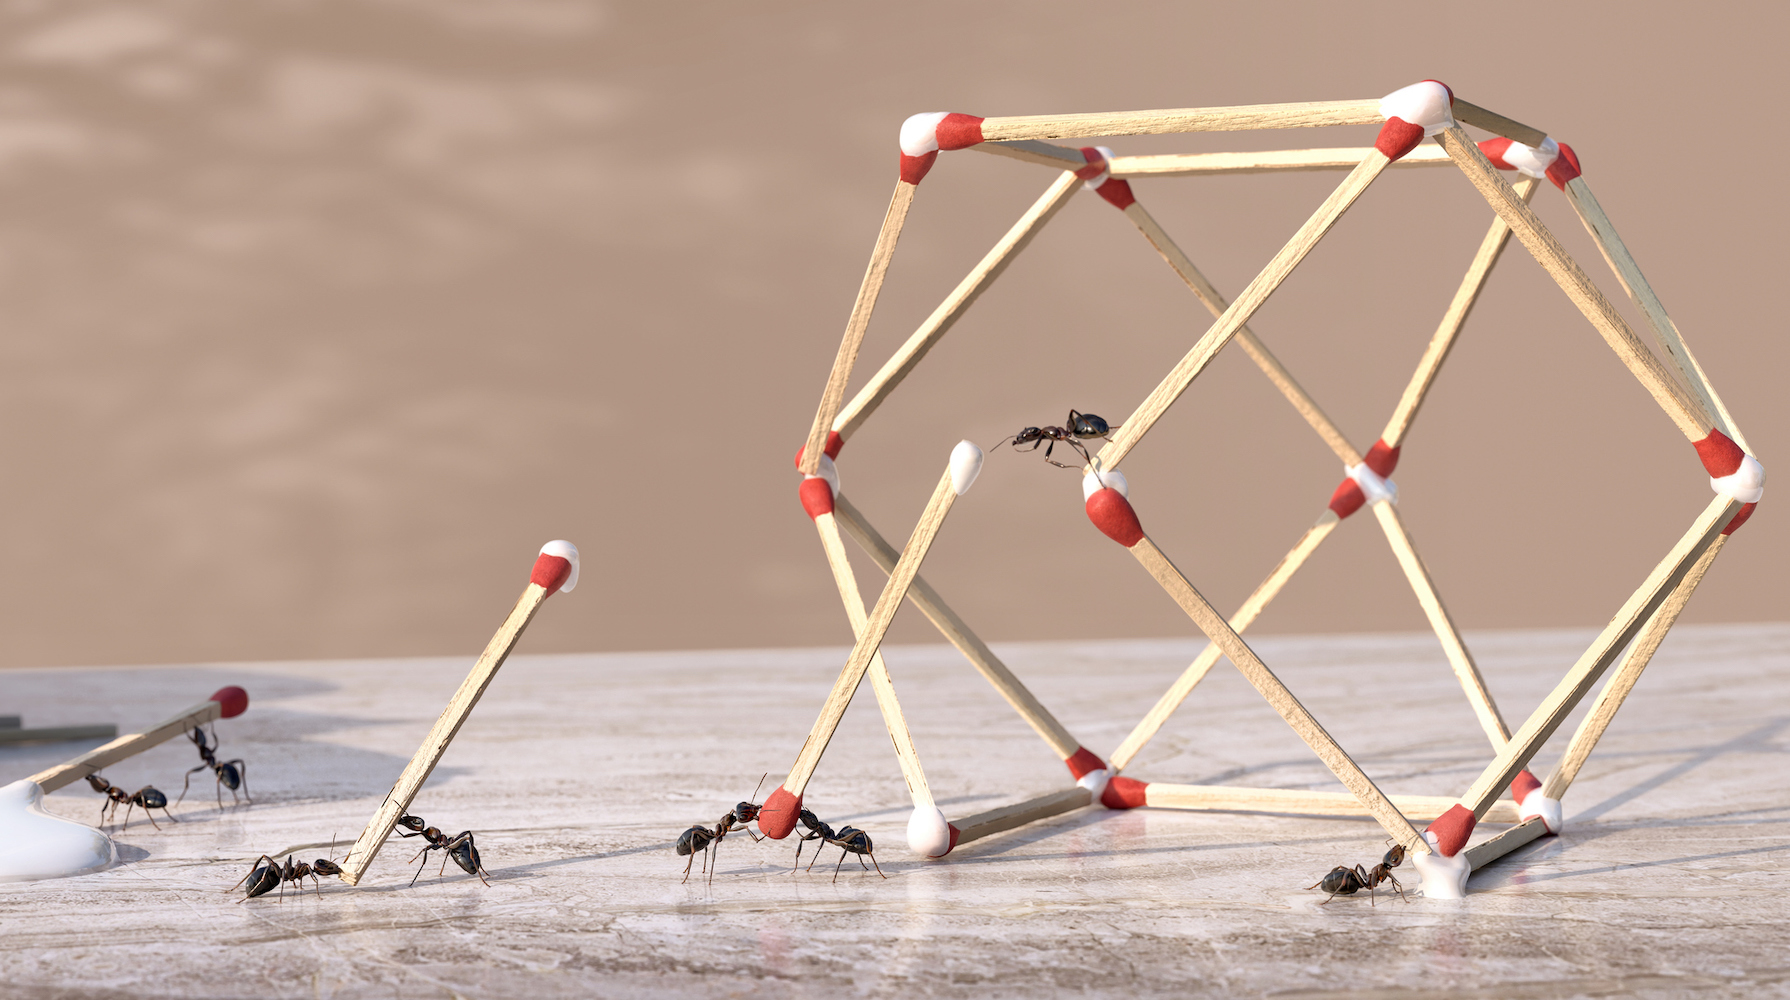 A group of ants working as a team to form a three-dimensional geometric sculpture out of glue and matchsticks.  The ants dip matchstick ends in glue dripping from a glue bottle and place them in position to form the shape on a marble countertop.